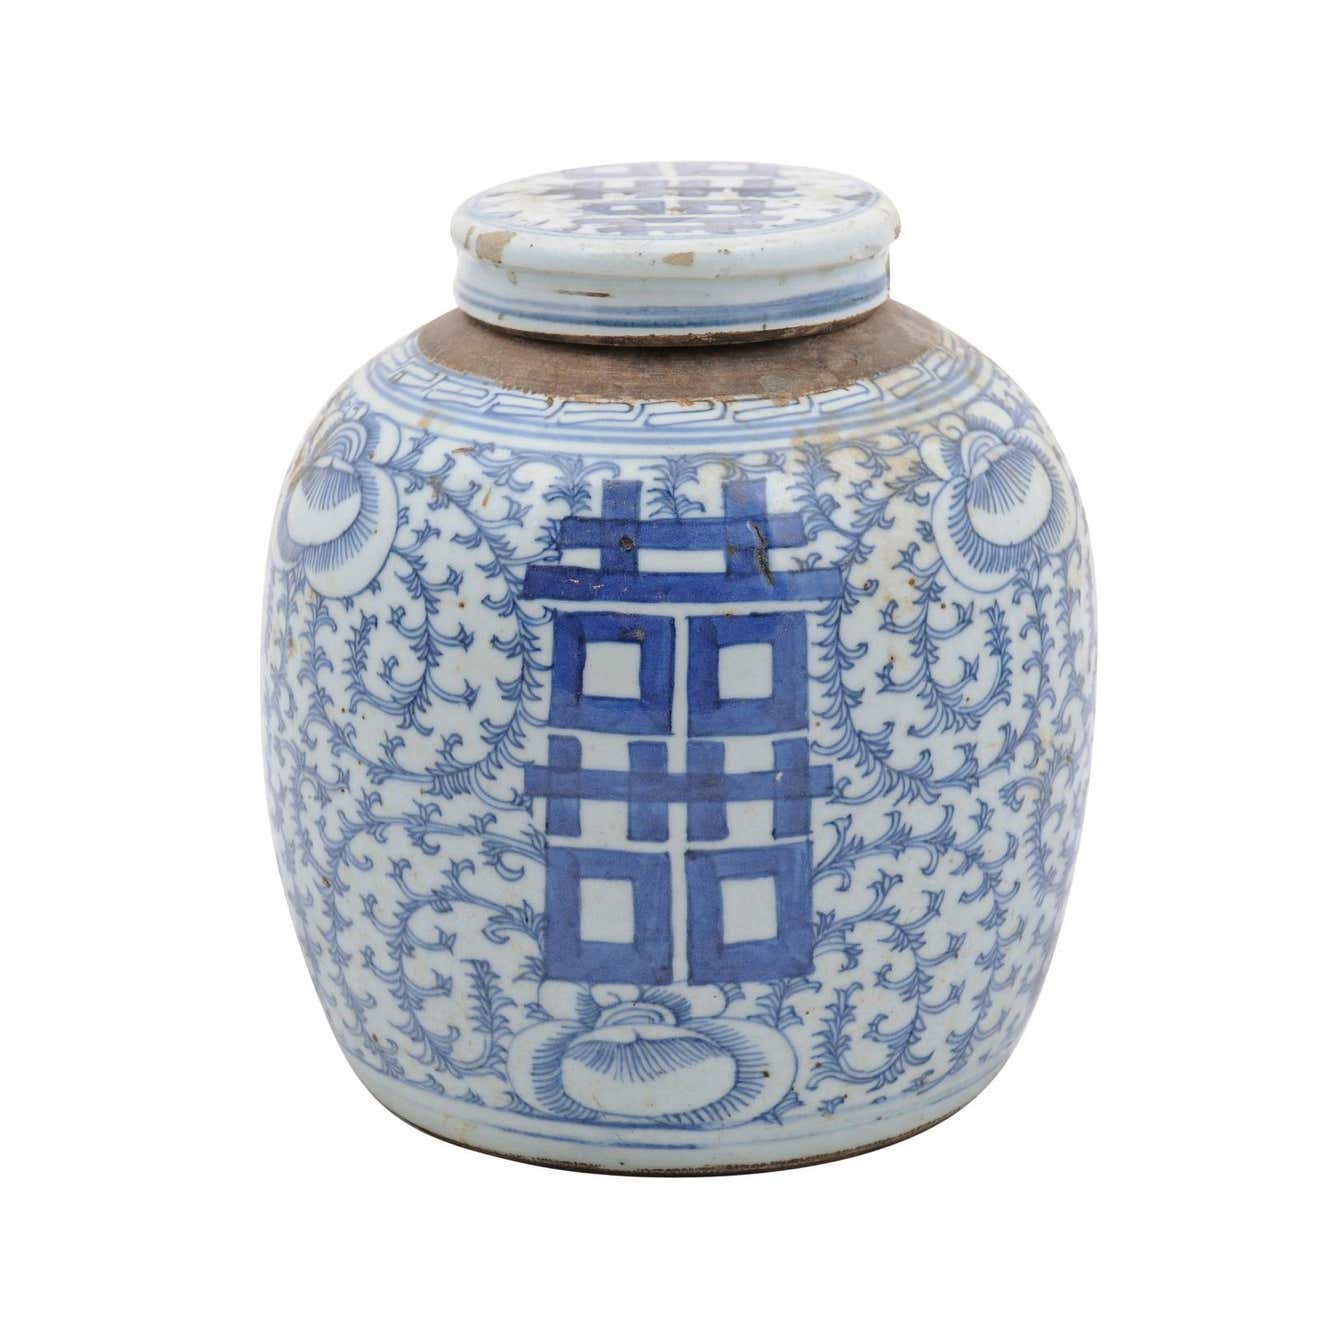 ON HOLD:  Chinese Export Early 20th Century Blue and White Double Happiness Lidded Jar